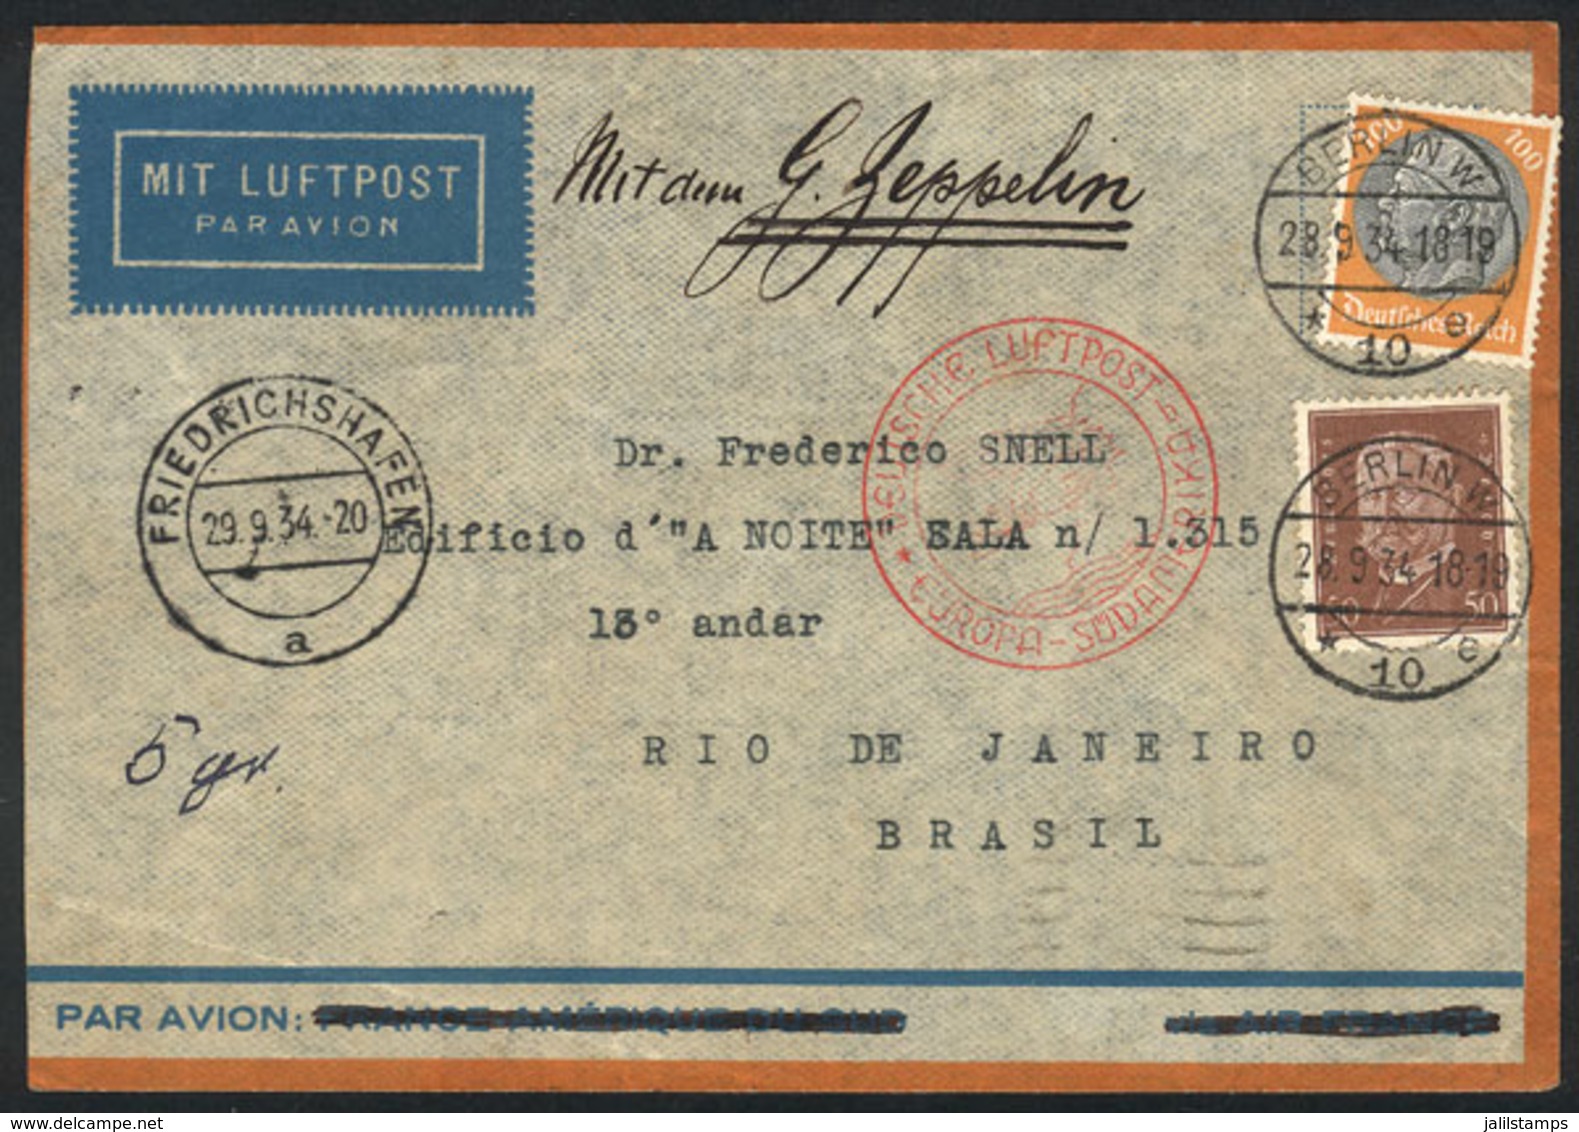 GERMANY: Cover Flown By ZEPPELIN, Sent From Berlin To Rio De Janeiro On 28/SE/1934, With Friedrichshafen Transit Mark Of - Lettres & Documents